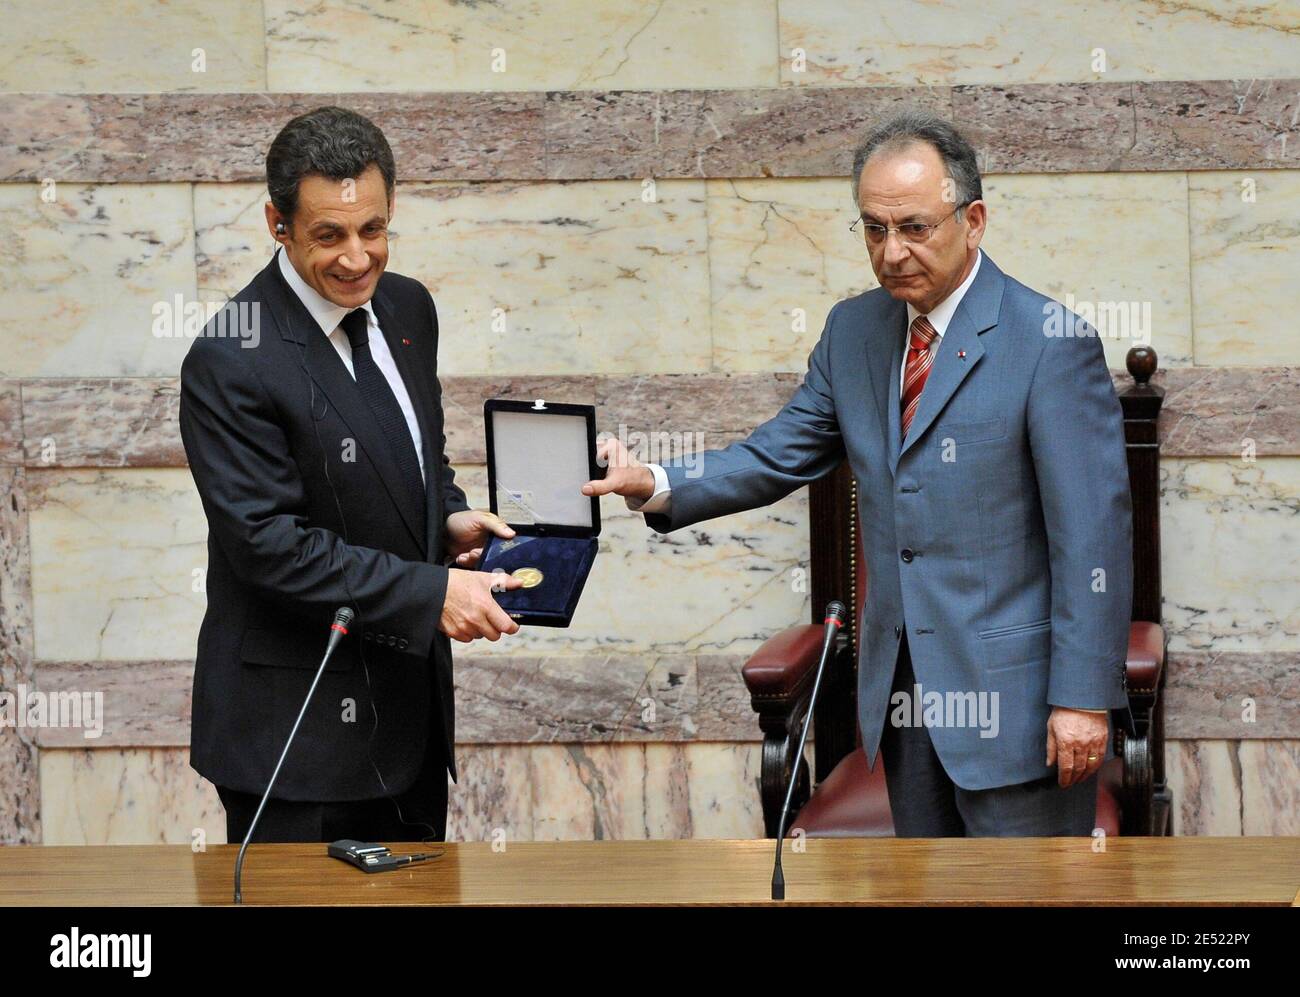 Speaker of the Greek parliament Dimitri Sioufas greets French President Nicolas Sarkozy at the parliament in Athens in Athens, Greece on June 6, 2008. Sarkozy arrived in Greece Friday for an official visit, the first by a French head of state in more than 25 years. Sarkozy was addressing the Greek parliament in a ceremony only accorded to three foreign presidents in the past: his predecessor Charles de Gaulle and US presidents Dwight Eisenhower and George Bush Sr. Photo by Mousse/ABACAPRESS.COM Stock Photo